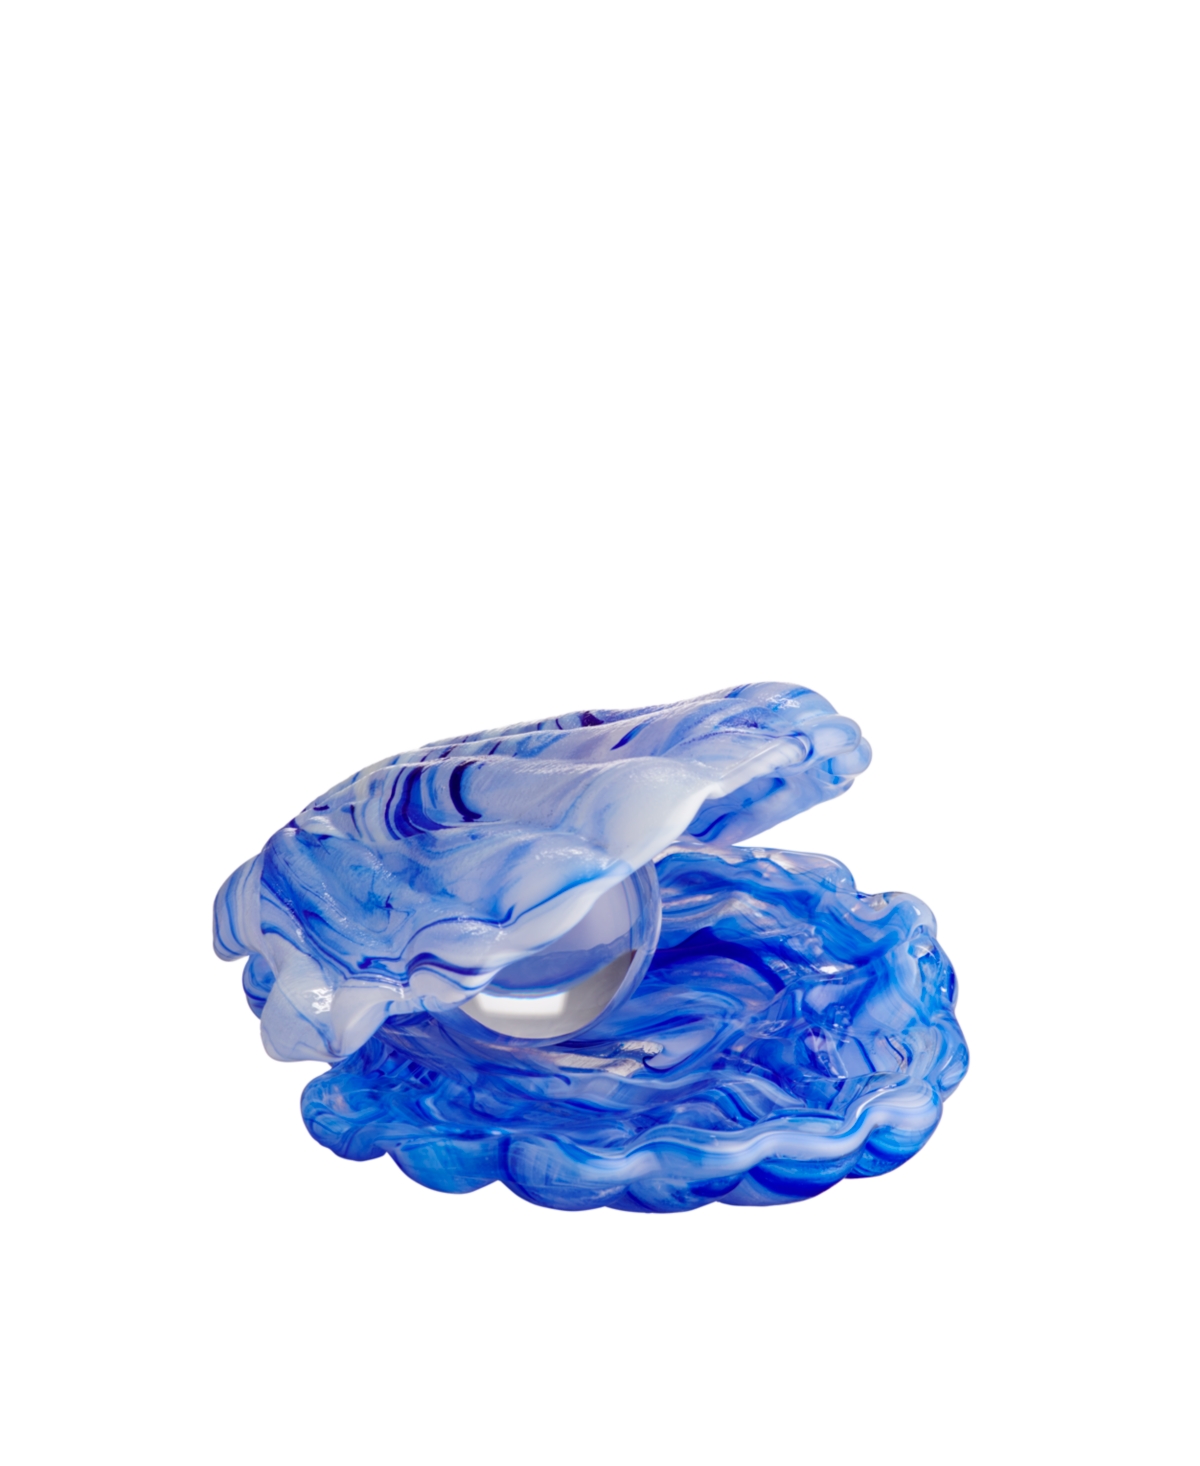 Mother of Pearl Blue Decor Bowl - Blue